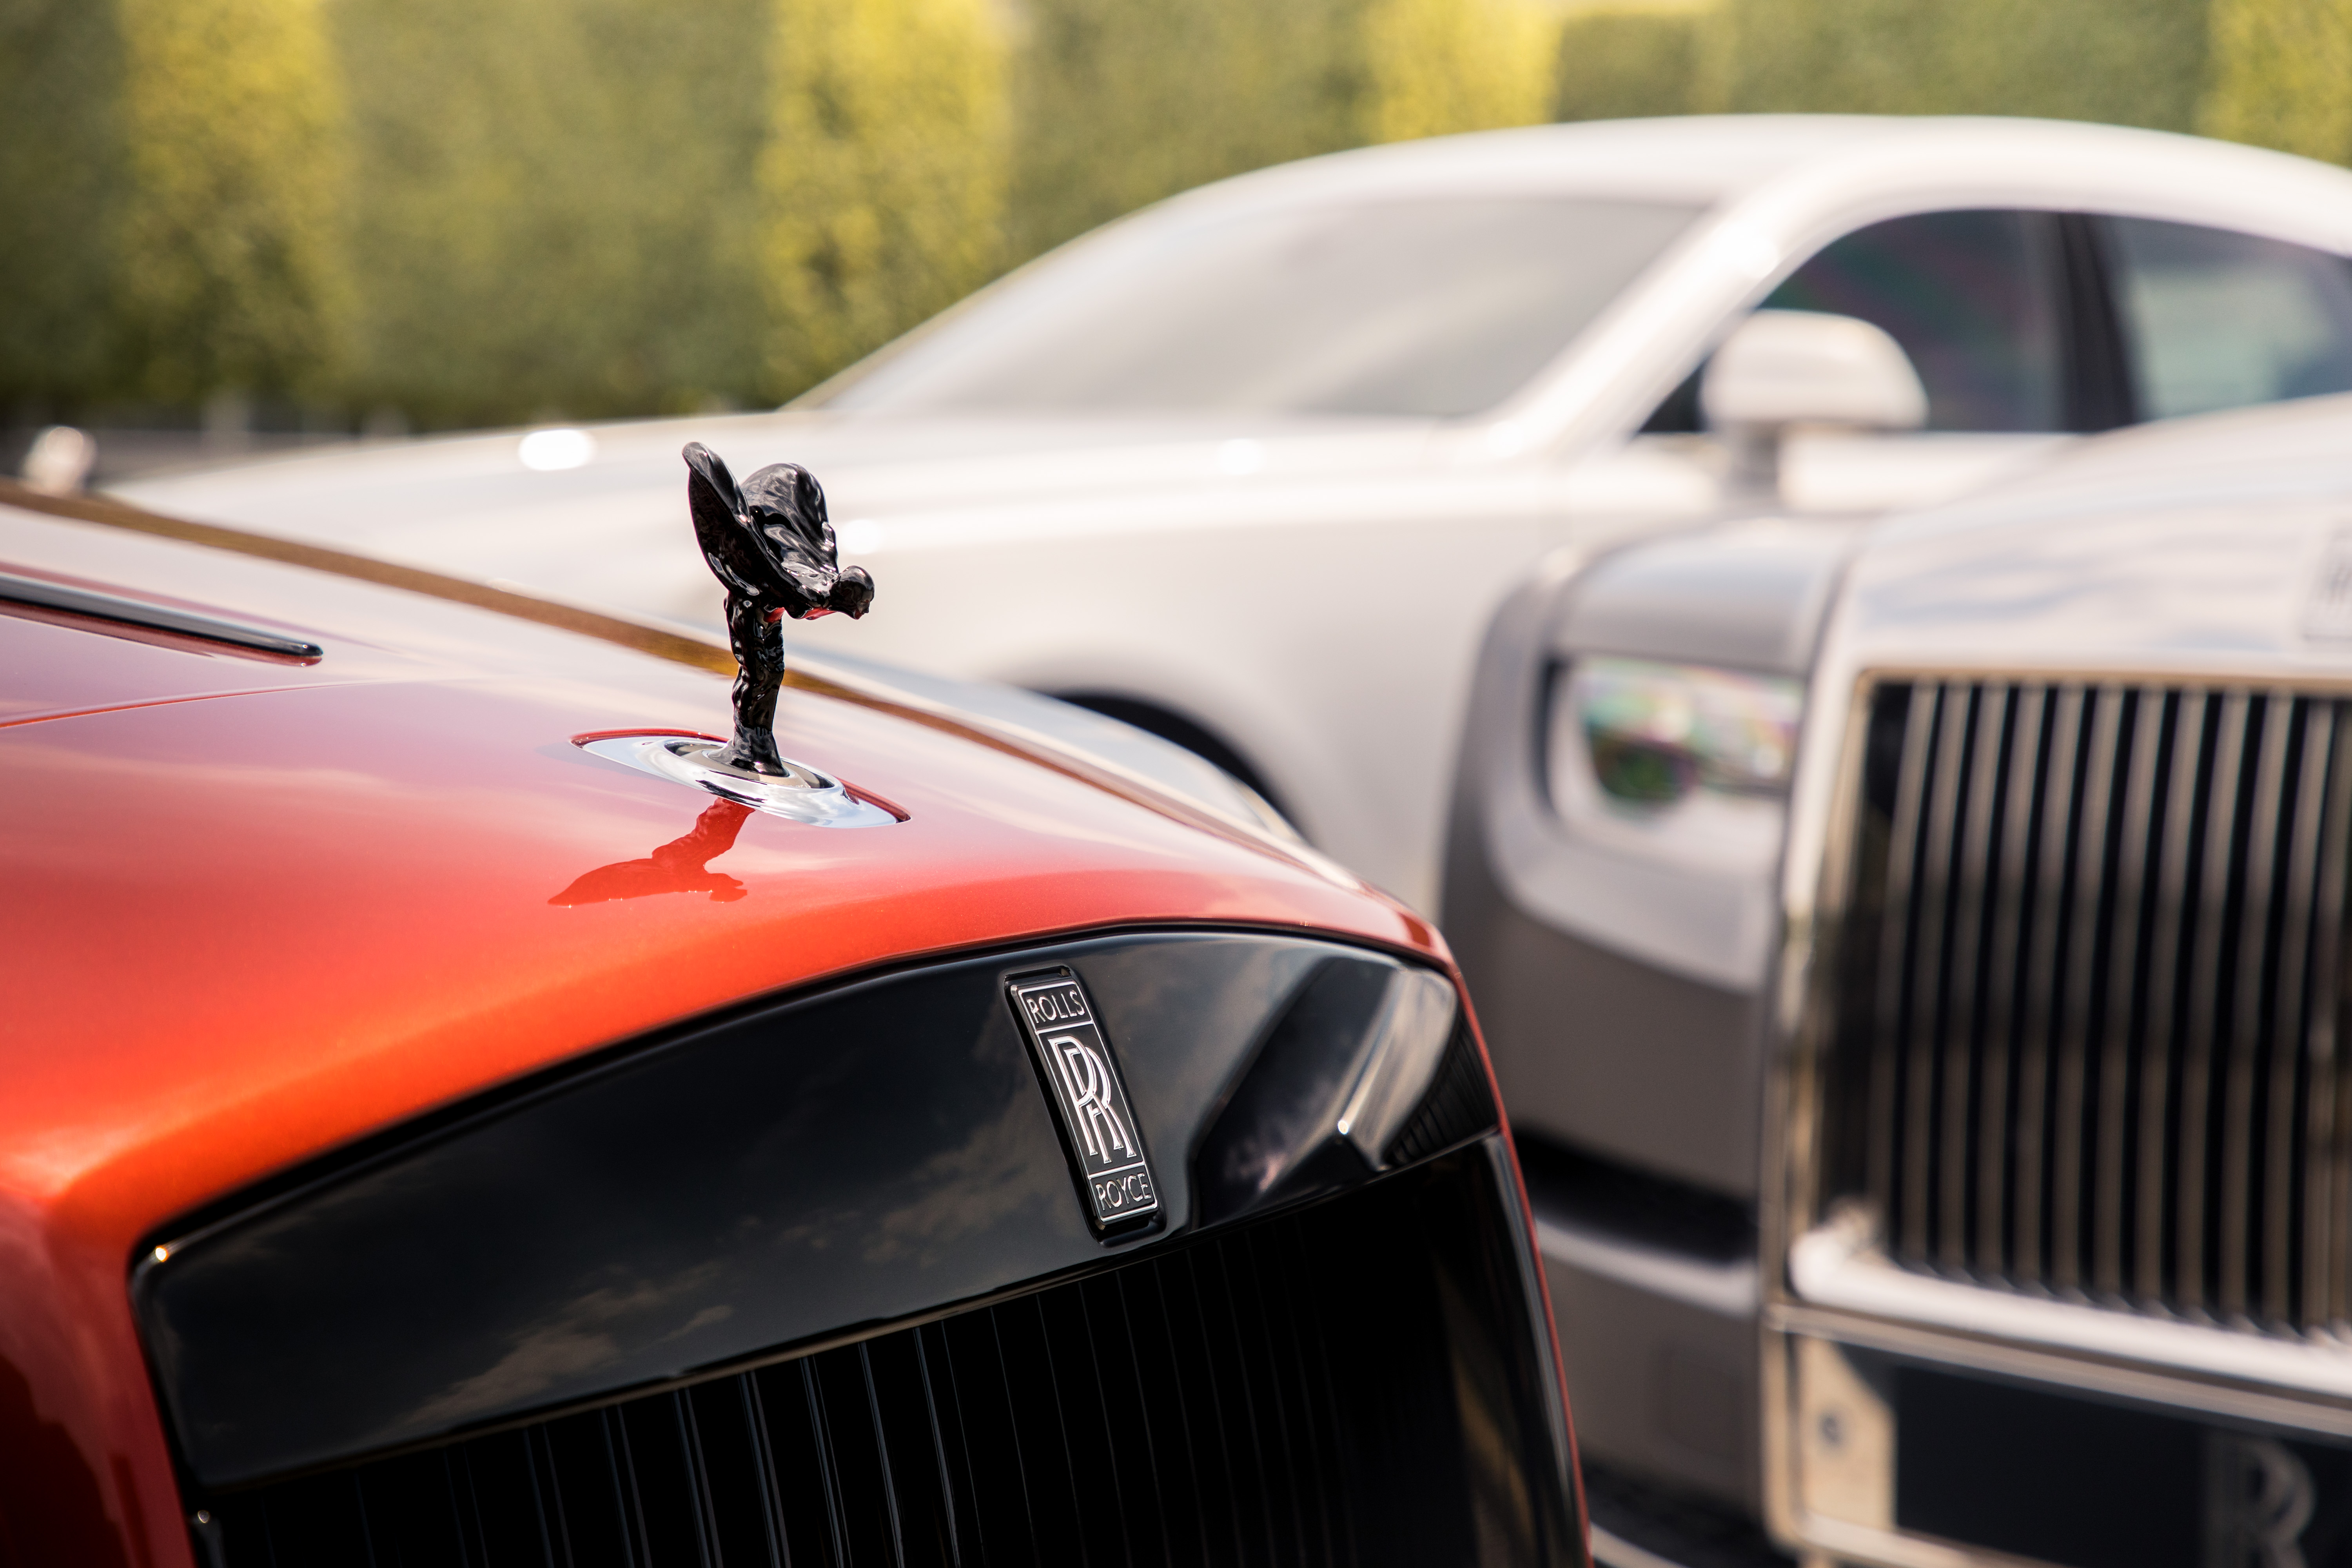 Rolls-Royce to Showcase Complete Portfolio of Motor Cars for the First Time at 2018 Goodwood Festival of Speed